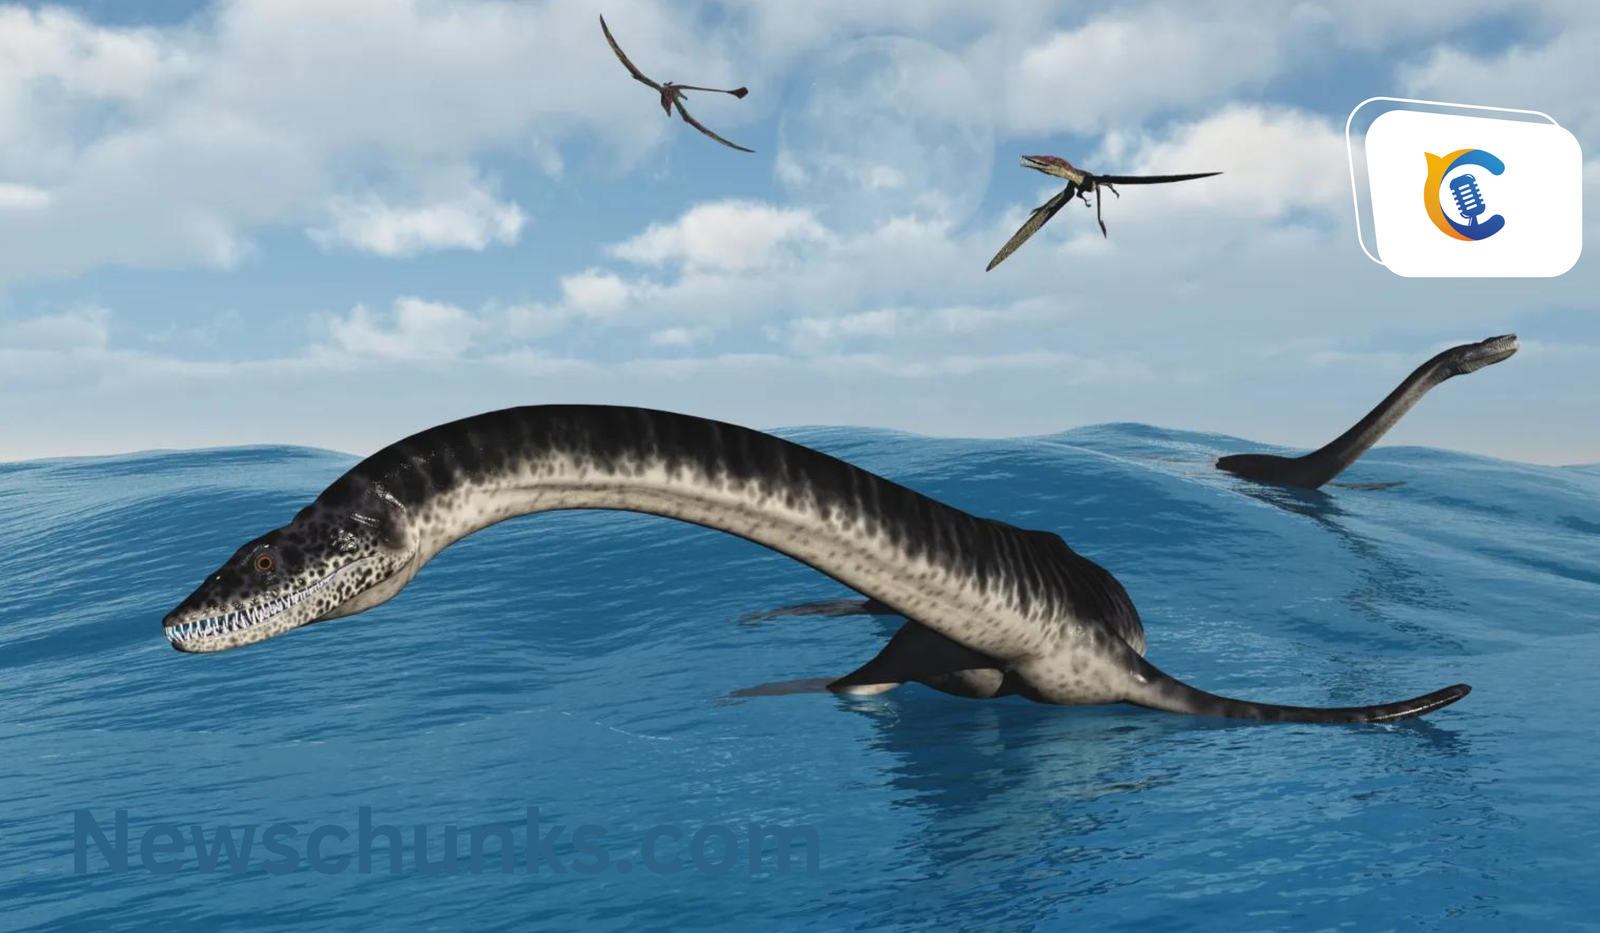 Is Loch Ness Monster Real or a Myth?